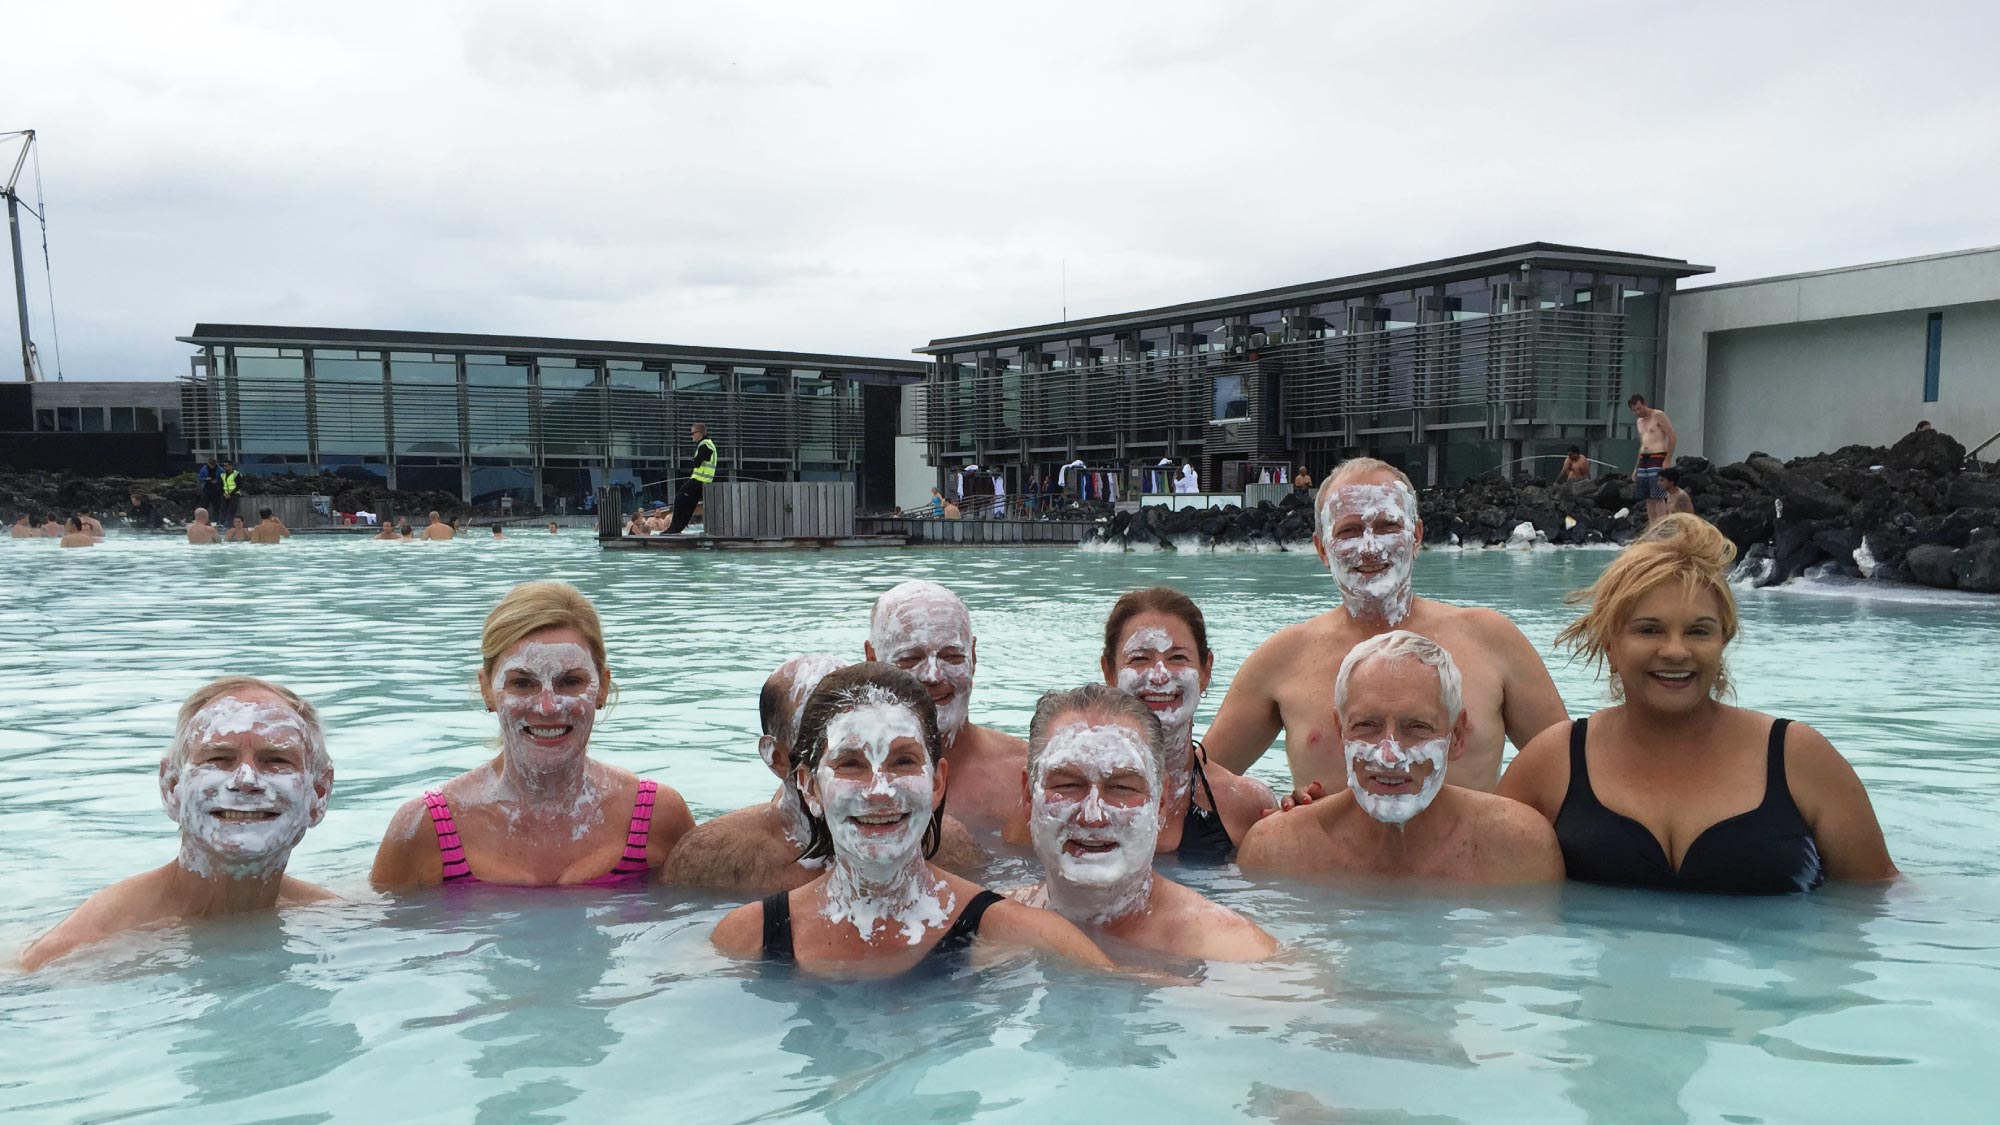 Friends laugh and unwind in the soothing turquoise waters of Iceland's iconic Blue Lagoon